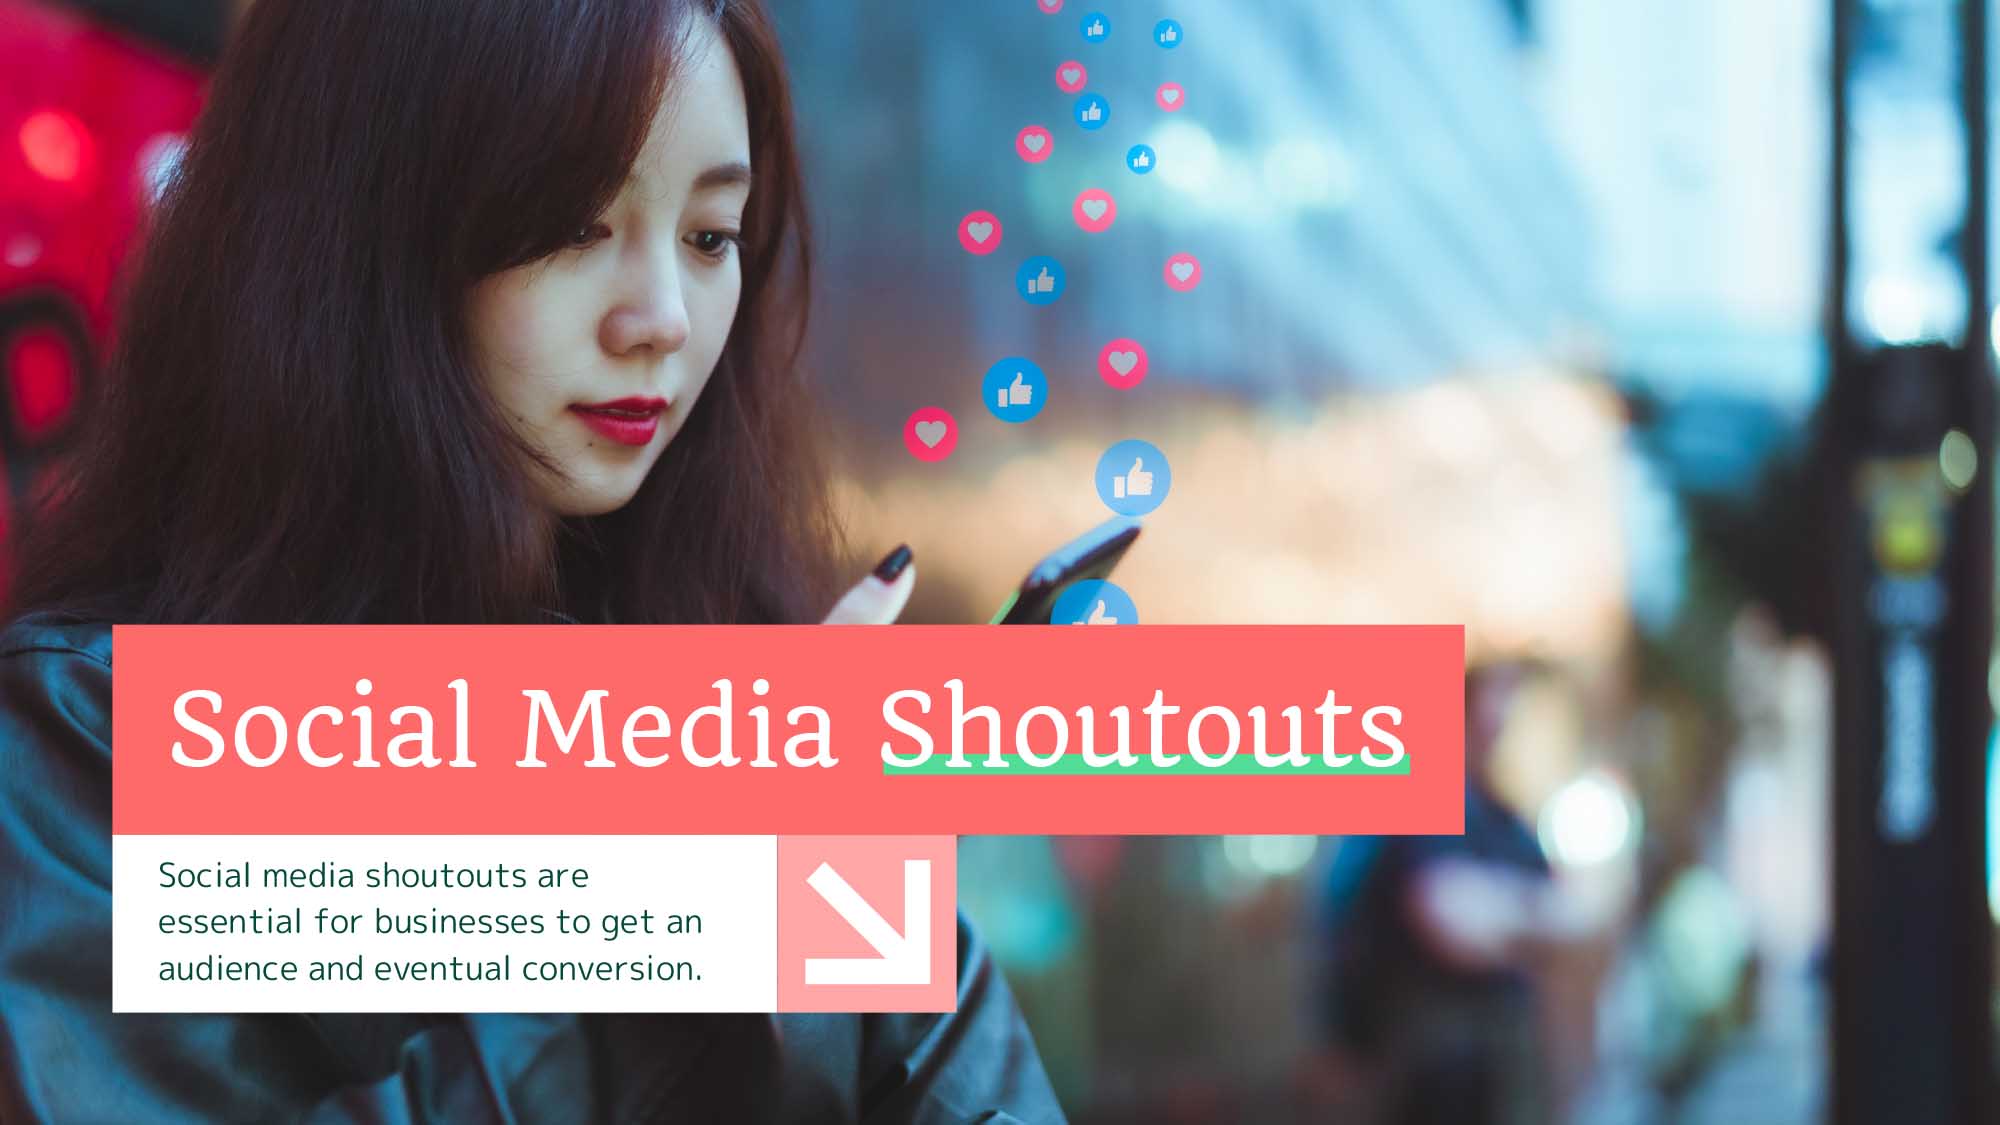 How to Get Social Media Shoutouts for Free in 3 Easy Ways?